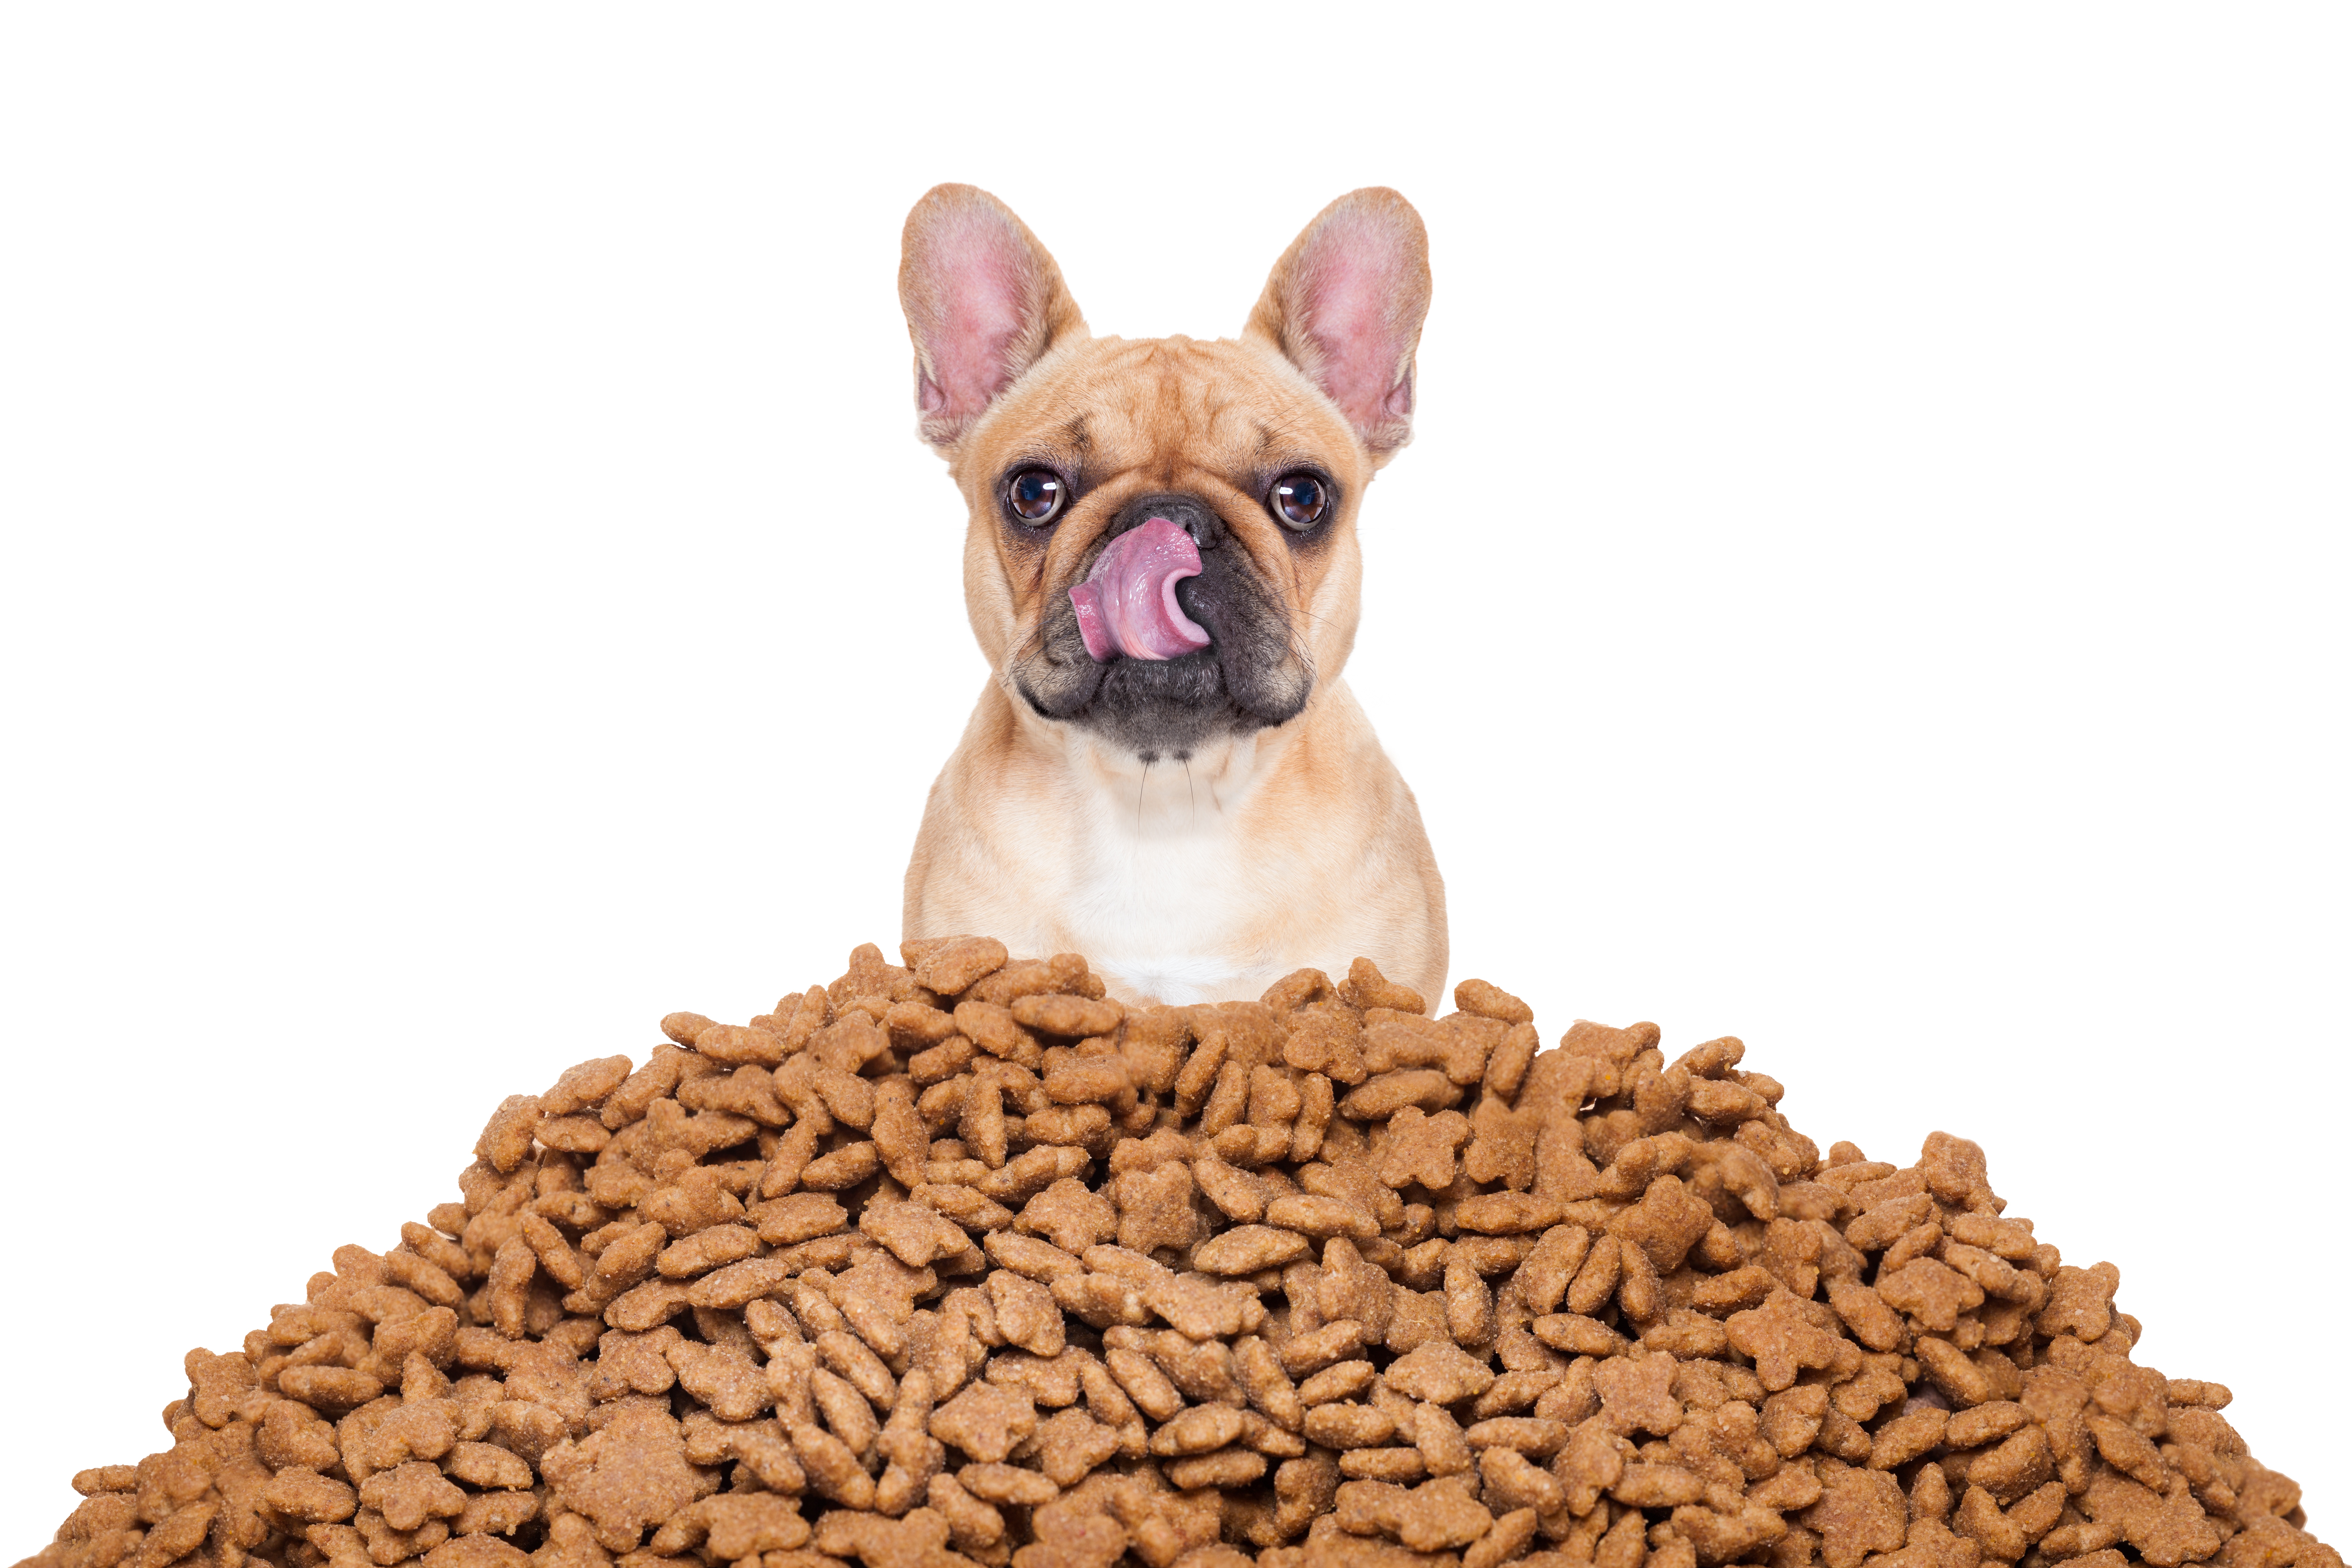 Dog with lots of dog food